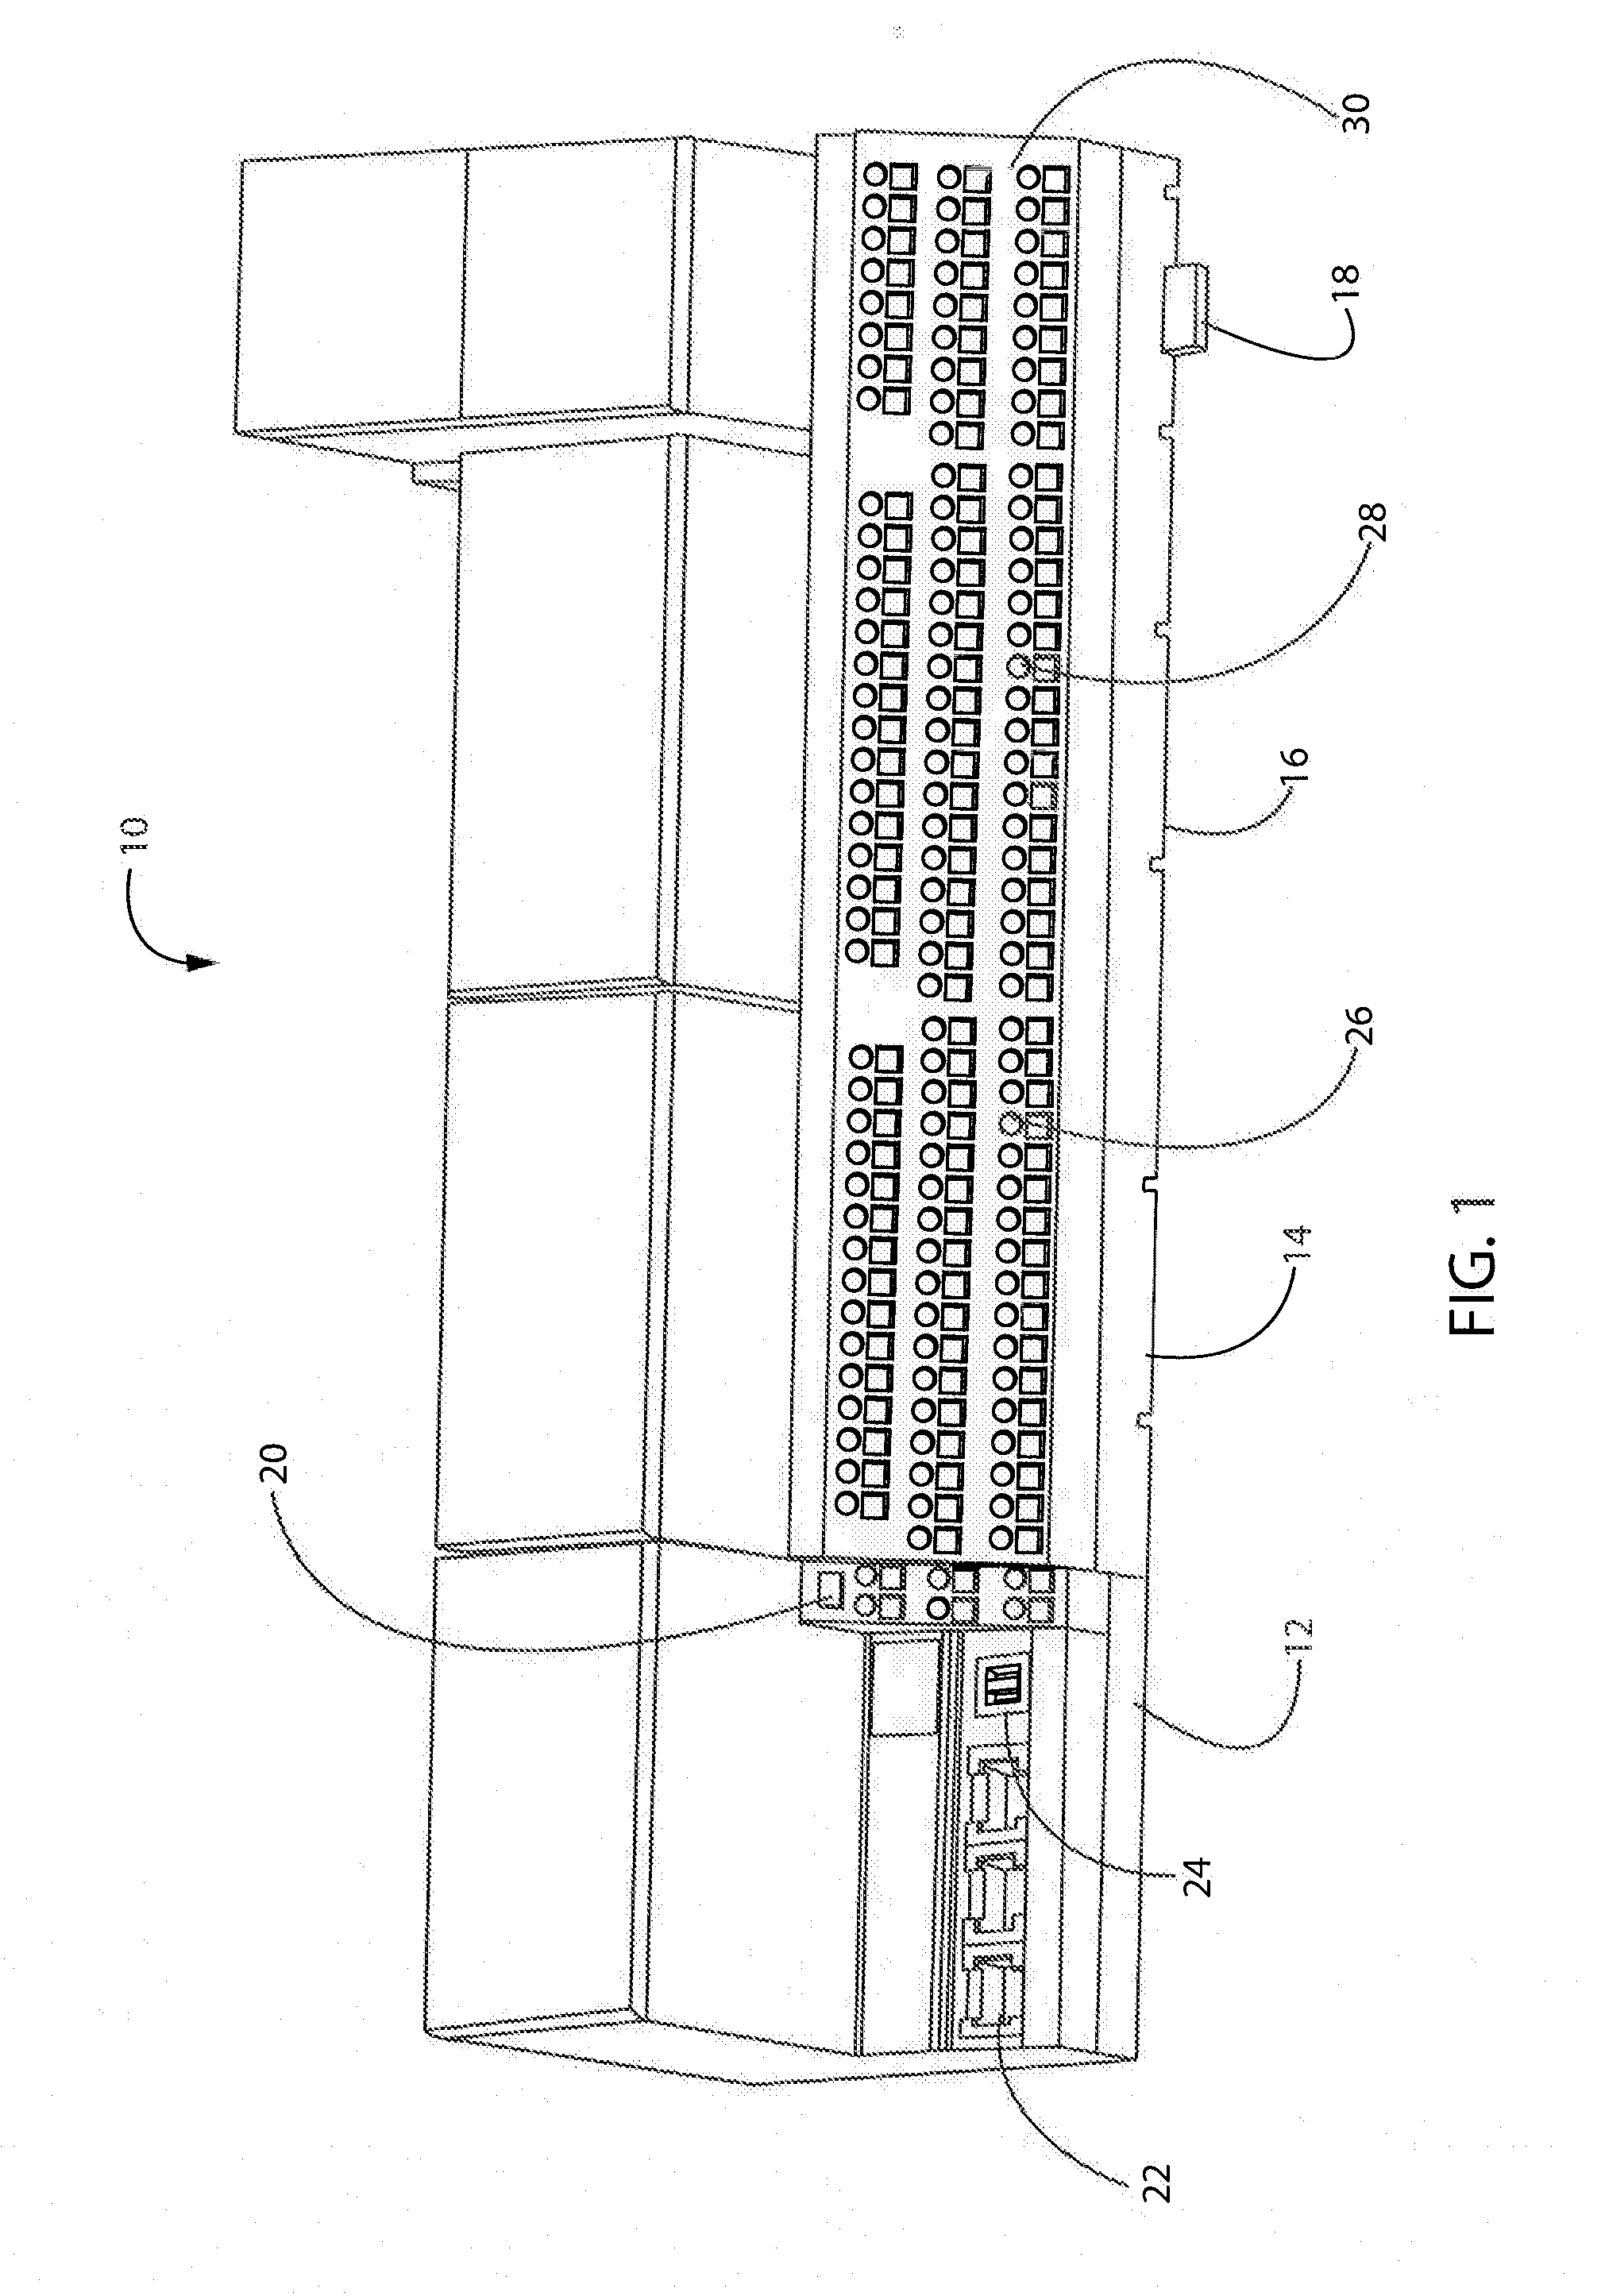 High Availability Device Level Ring Backplane